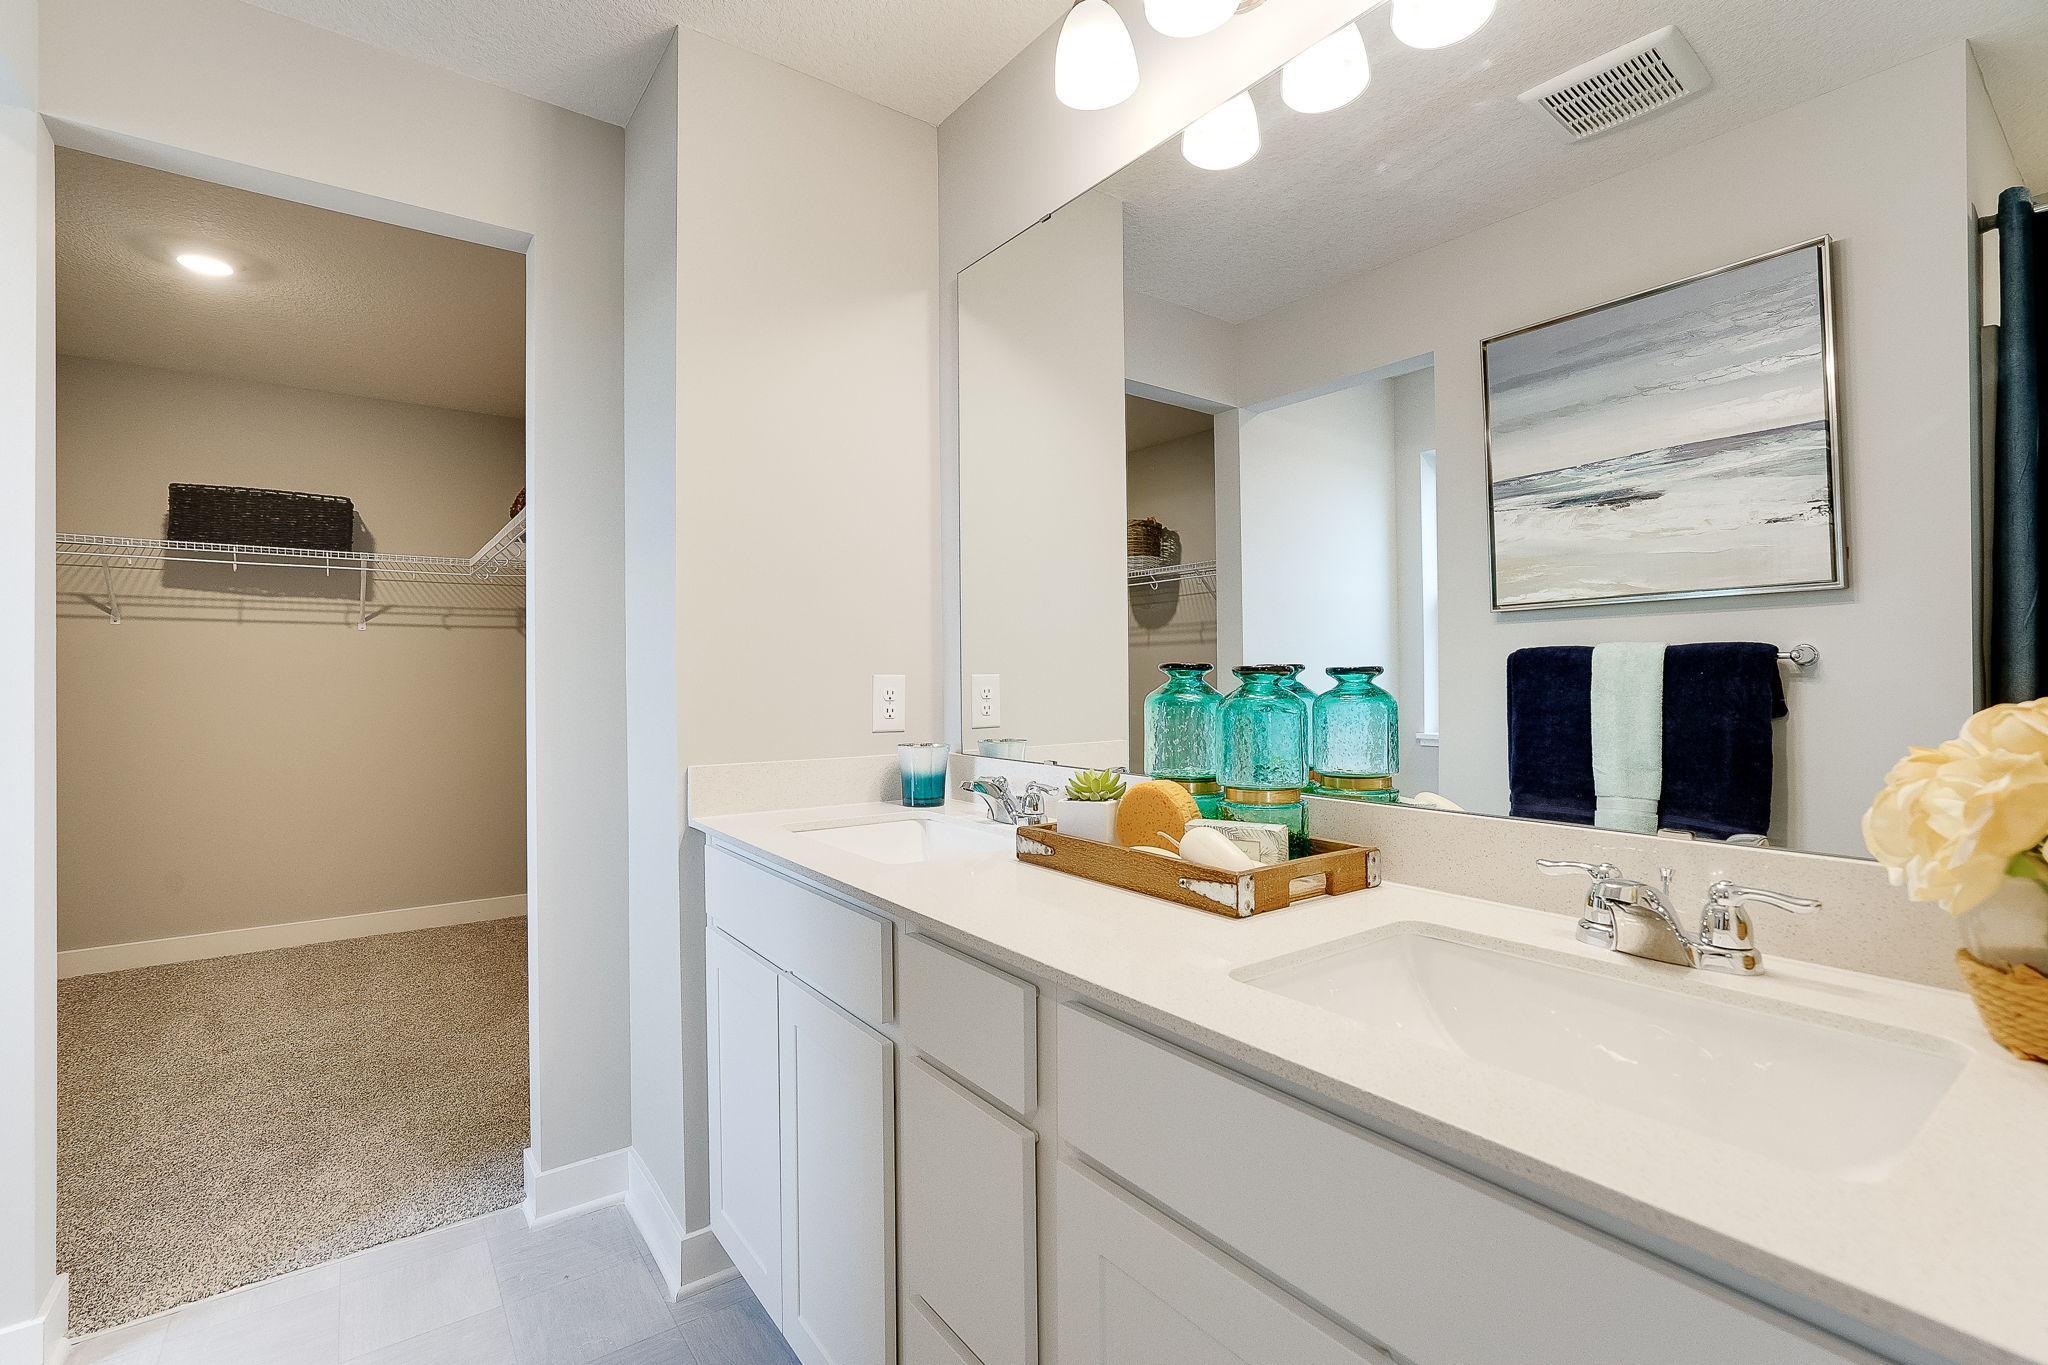 The attached primary bathroom makes getting ready to go fun! It features a double quartz vanity, linen closet, walk-in shower and separated toilet. (Model home, colors will vary)